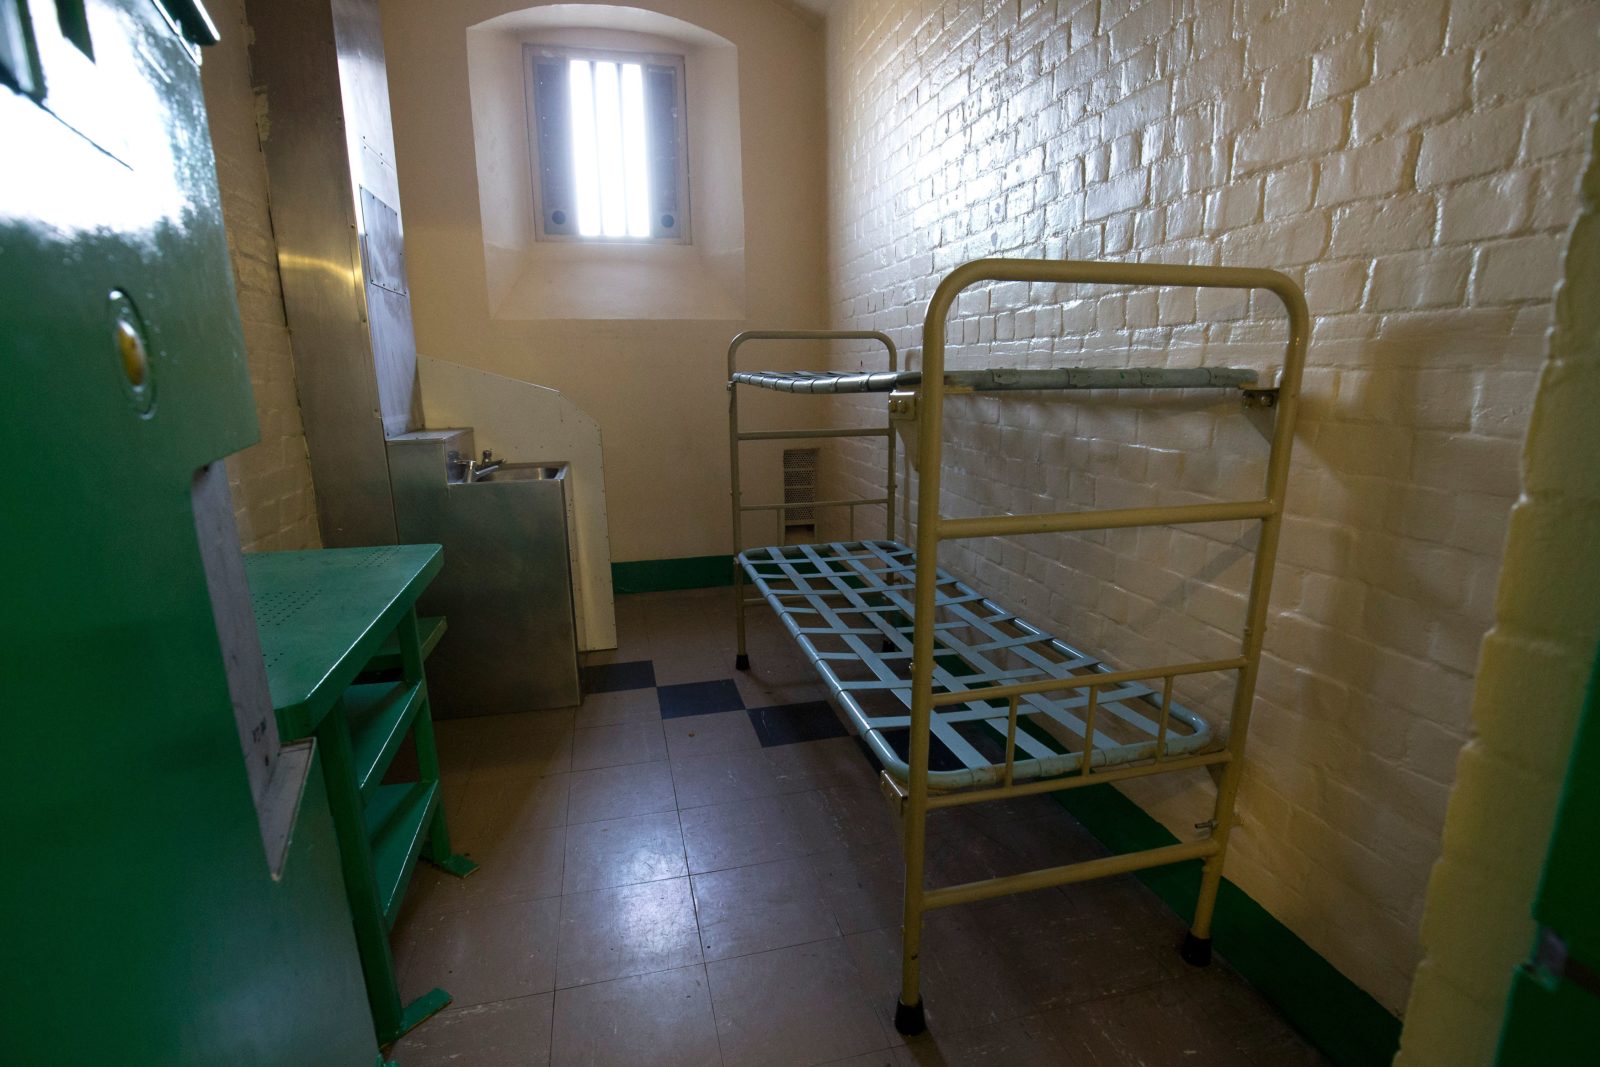 Oscar Wilde: A cell is pictured inside Reading Gaol